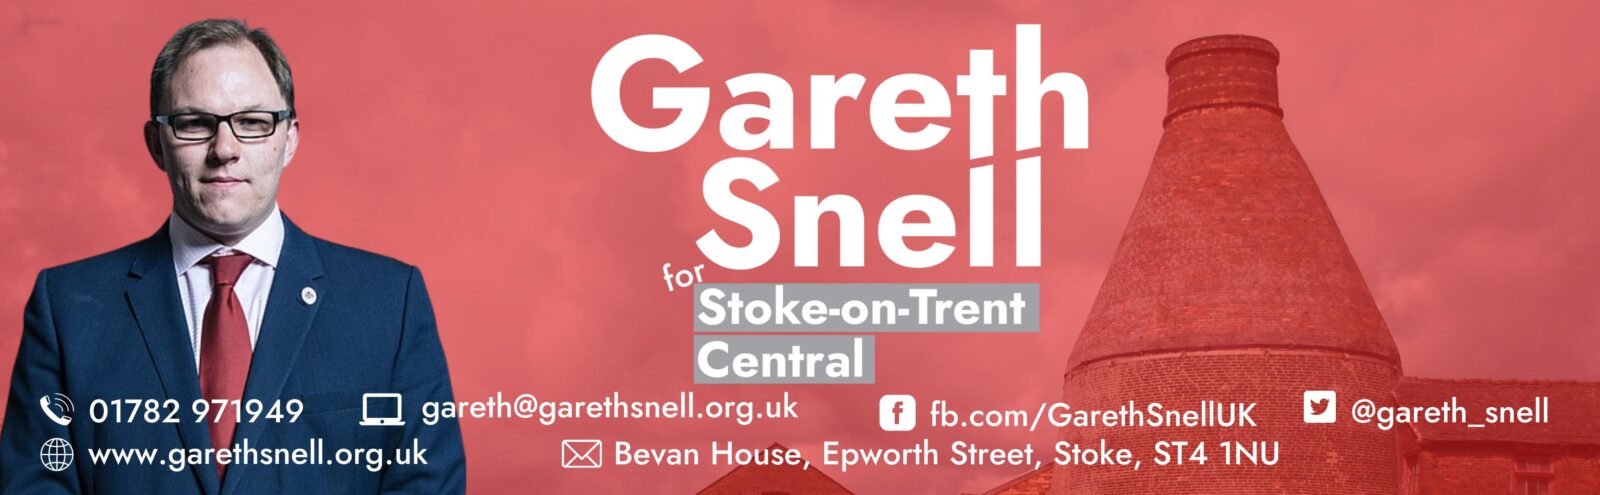 Labour & Co-op Candidate for Stoke-on-Trent Central